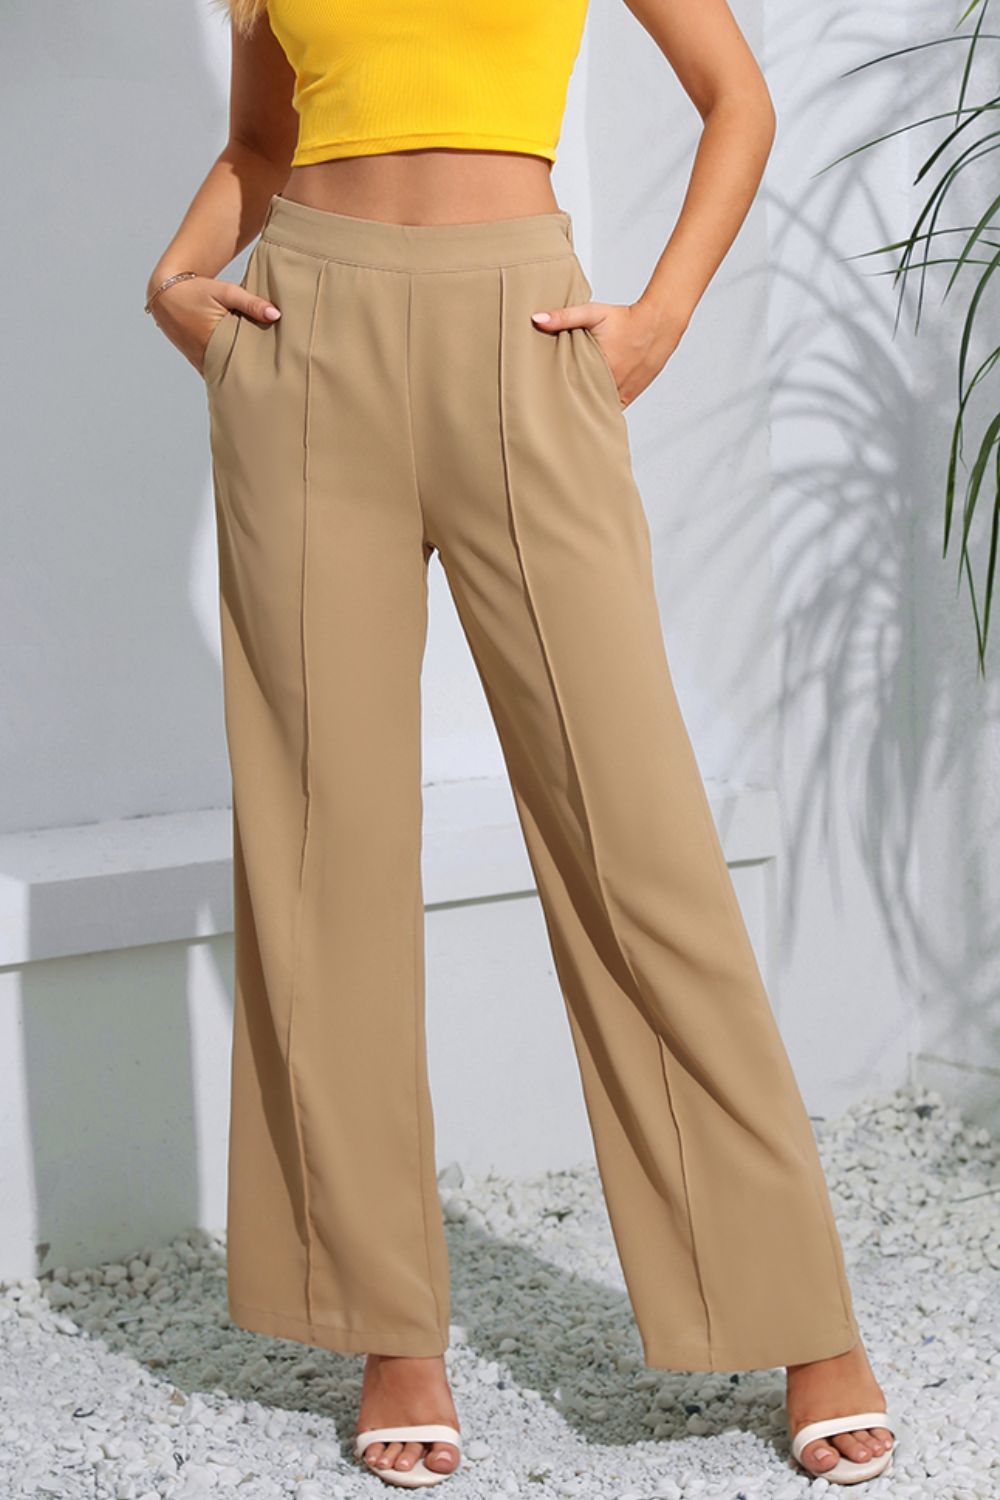 Tan Classy Pants with Pockets